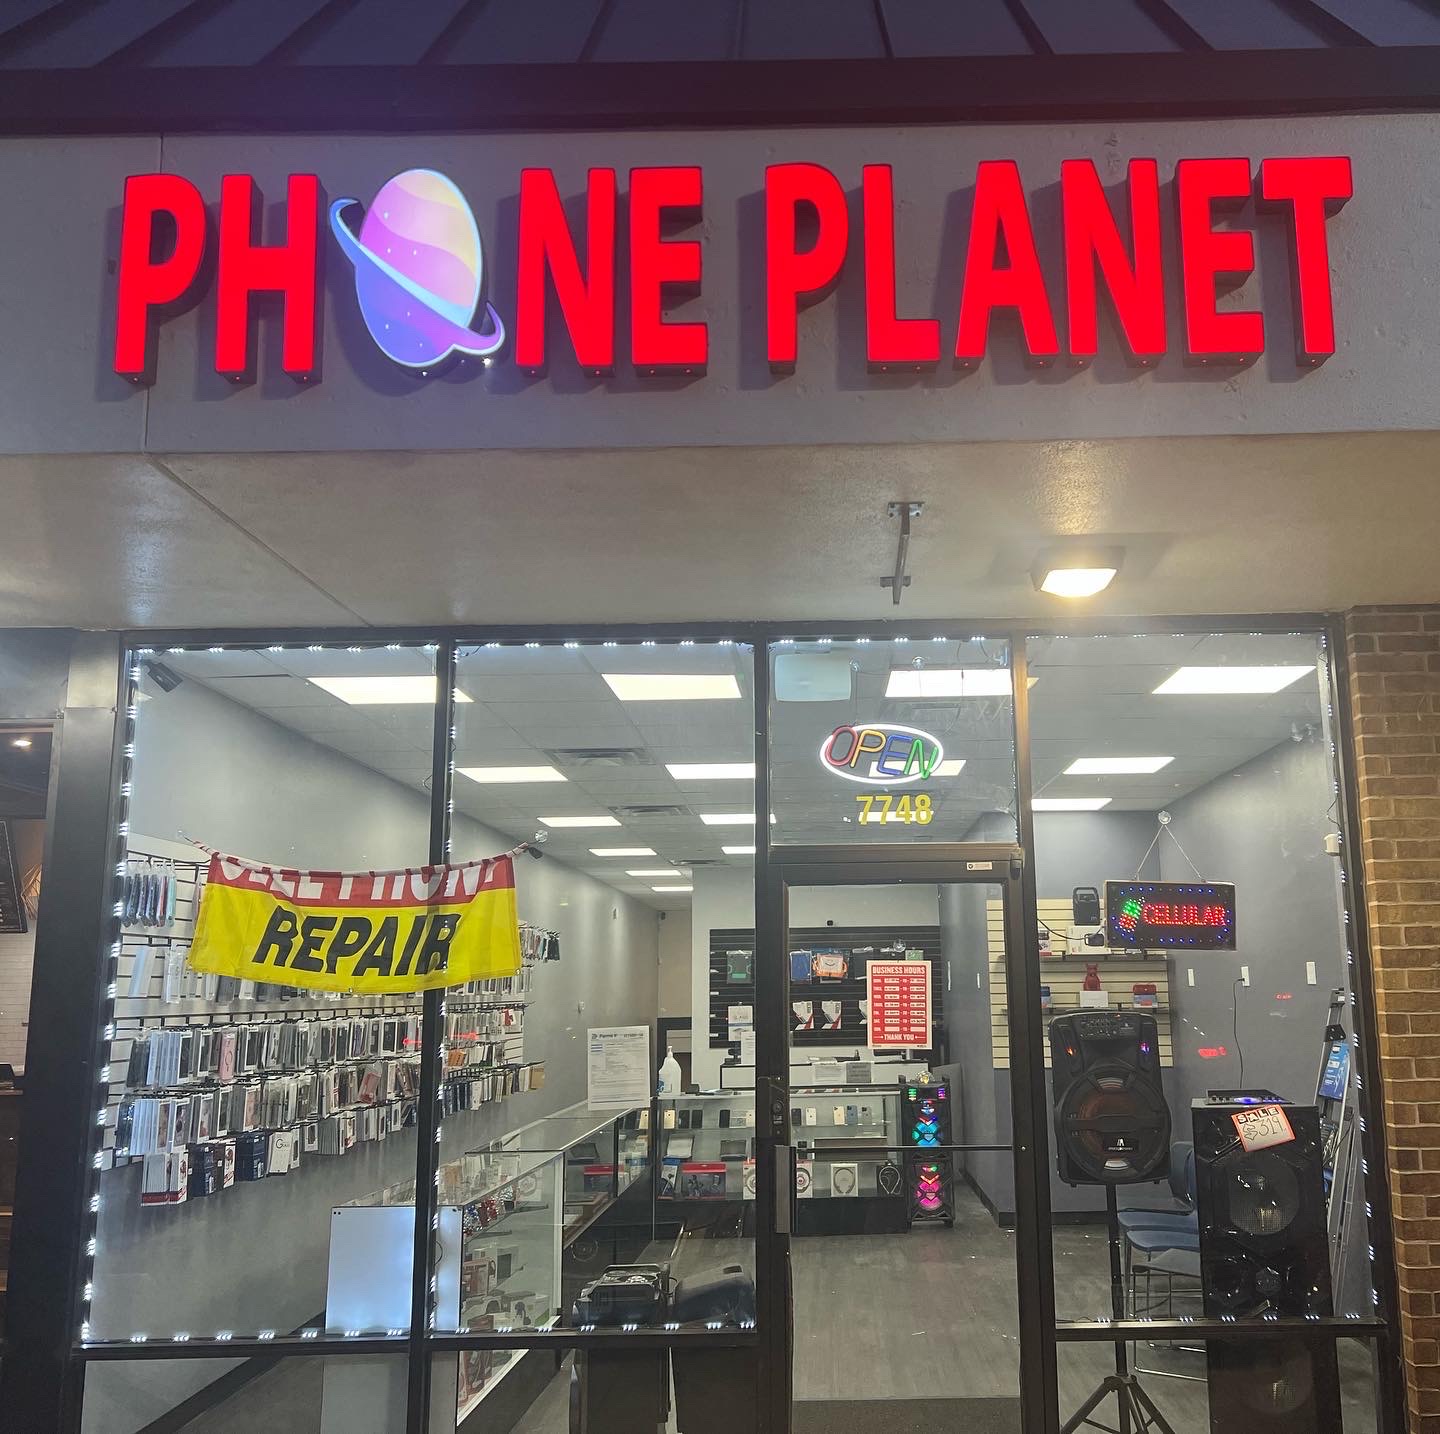 Phone planet- cellphone and computer repair